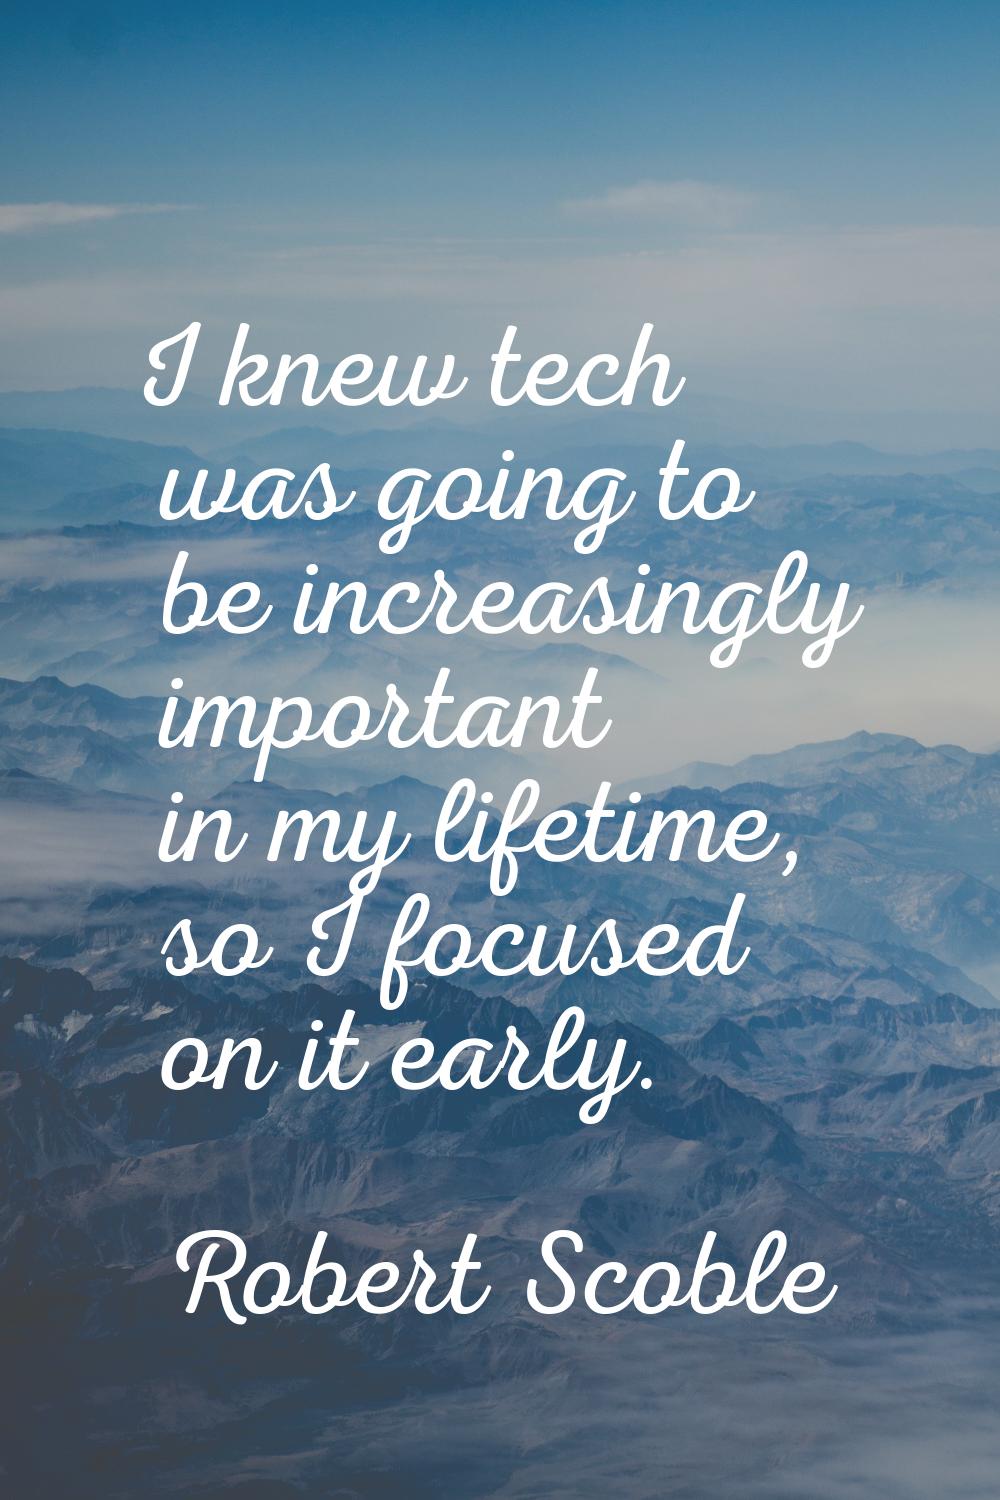 I knew tech was going to be increasingly important in my lifetime, so I focused on it early.